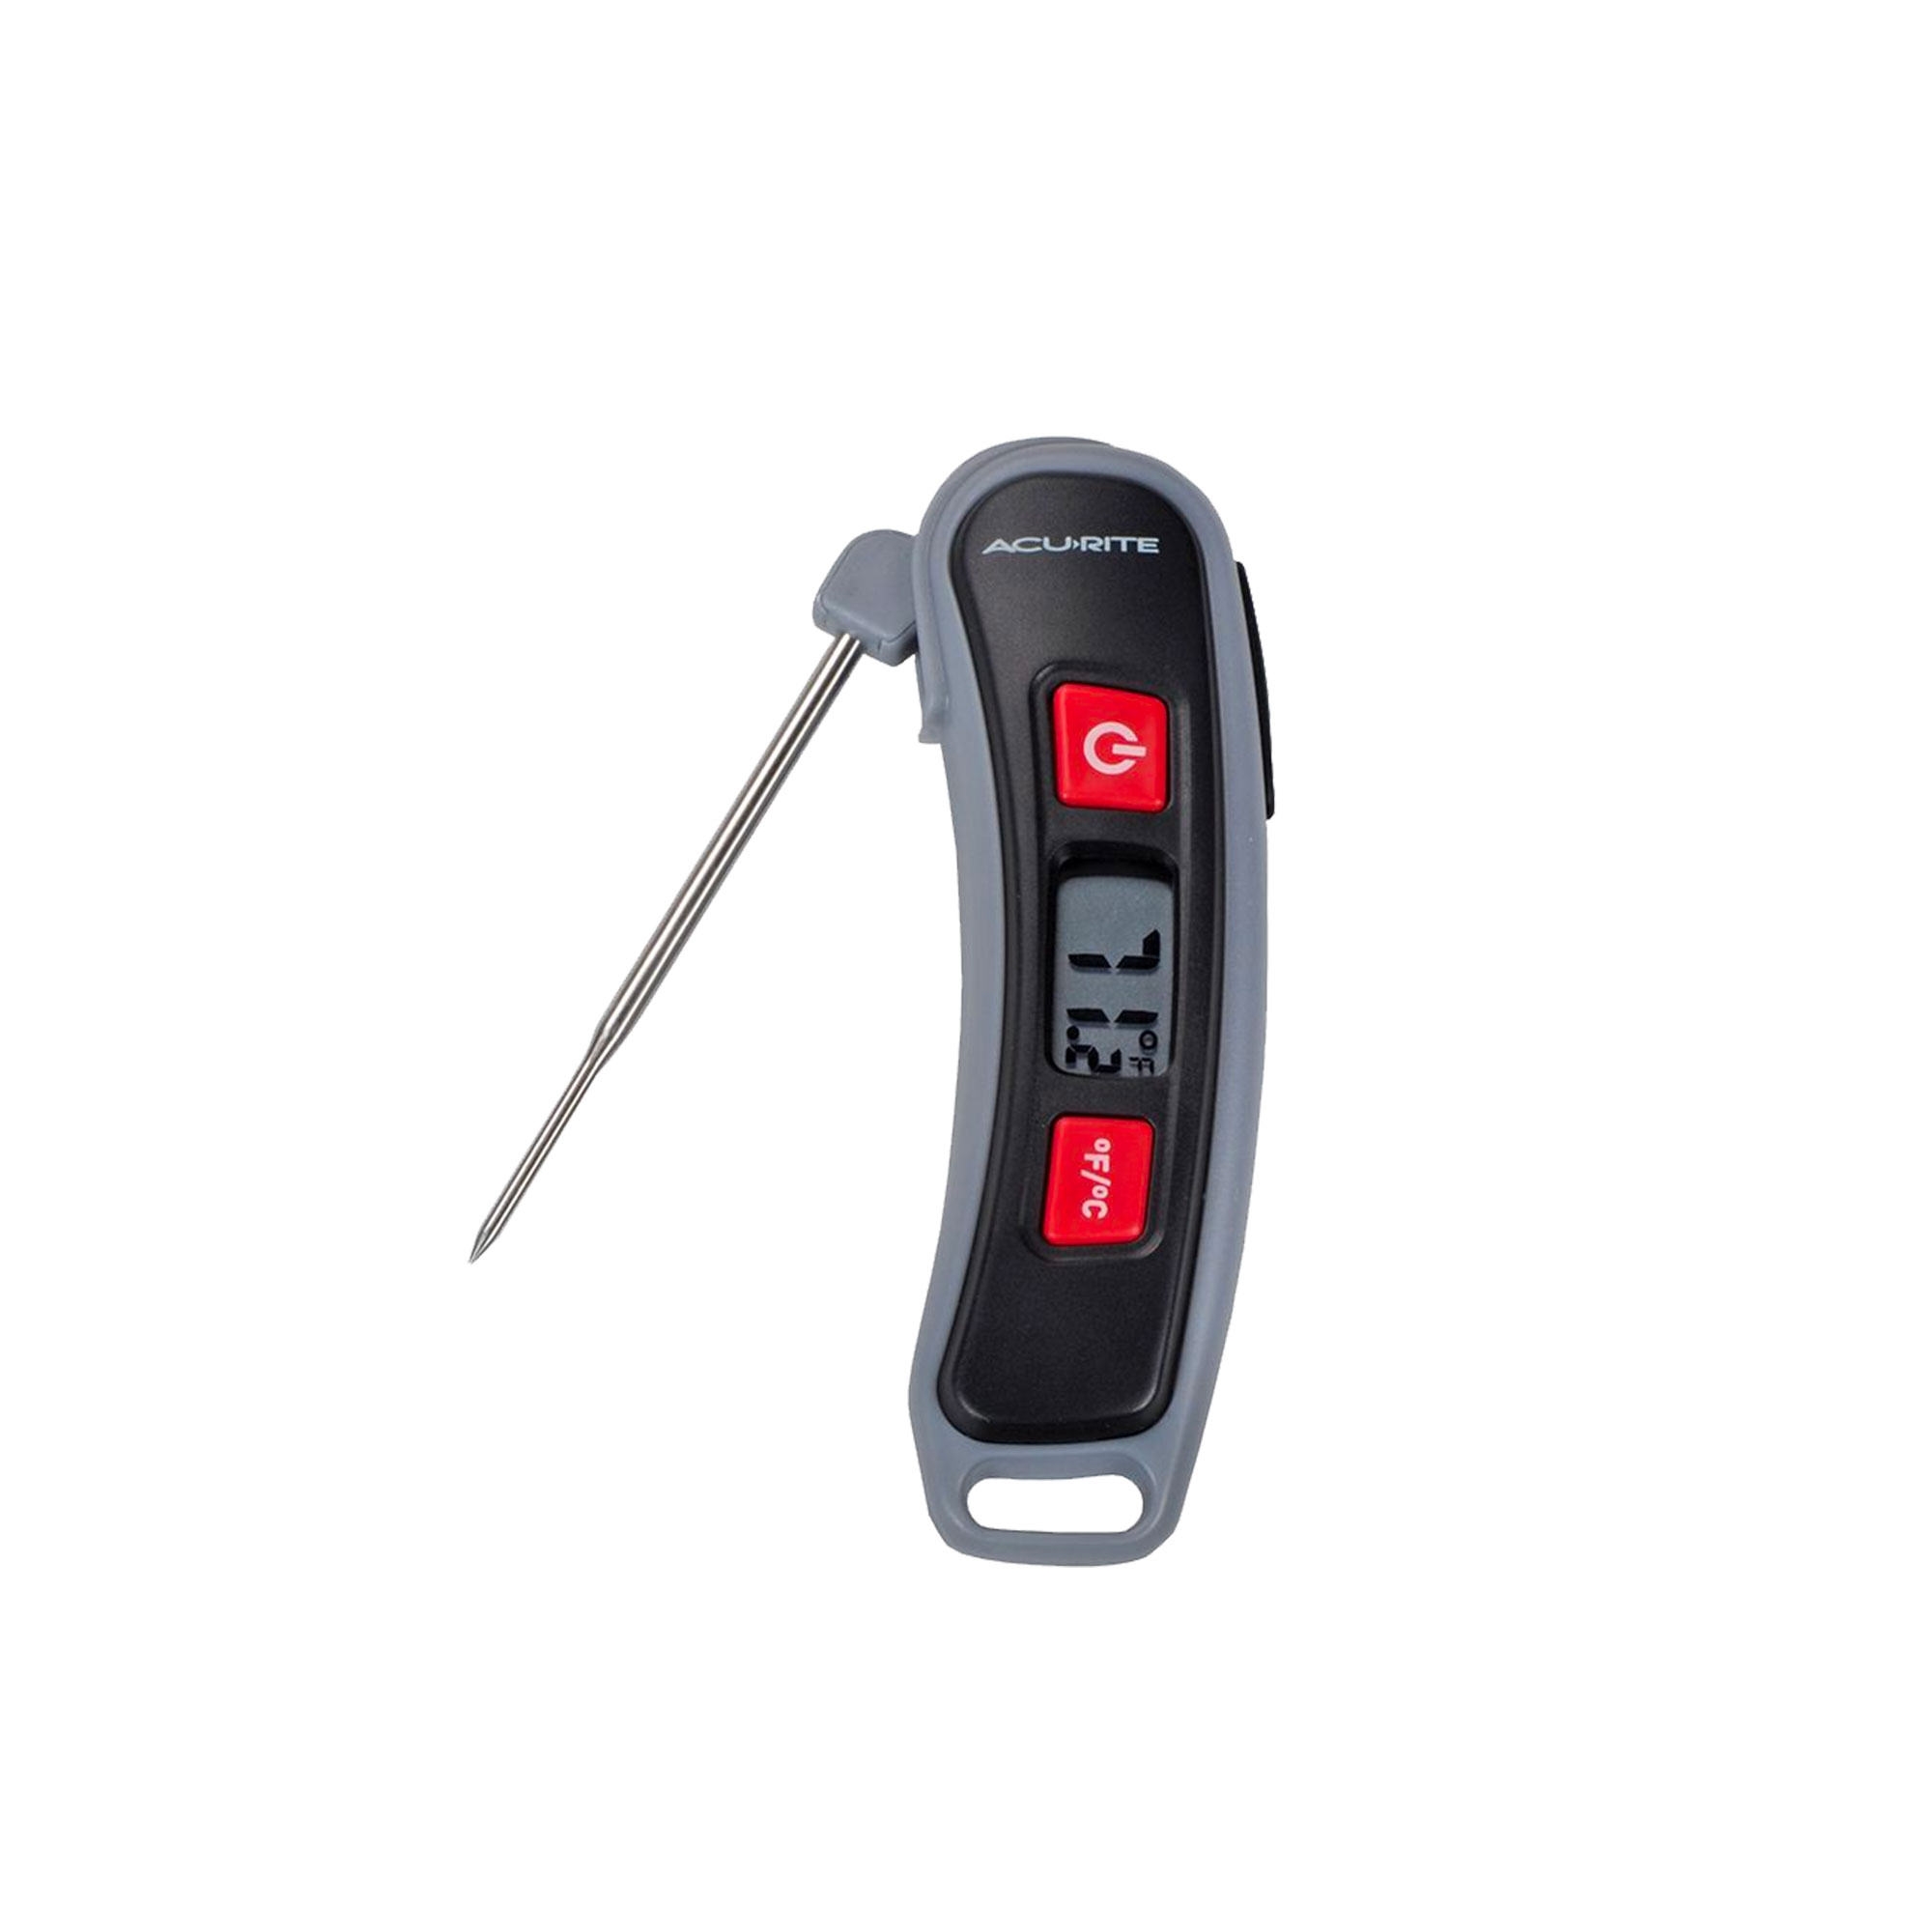 Acurite Digital Instant Read Thermometer with Folding Probe Image 1